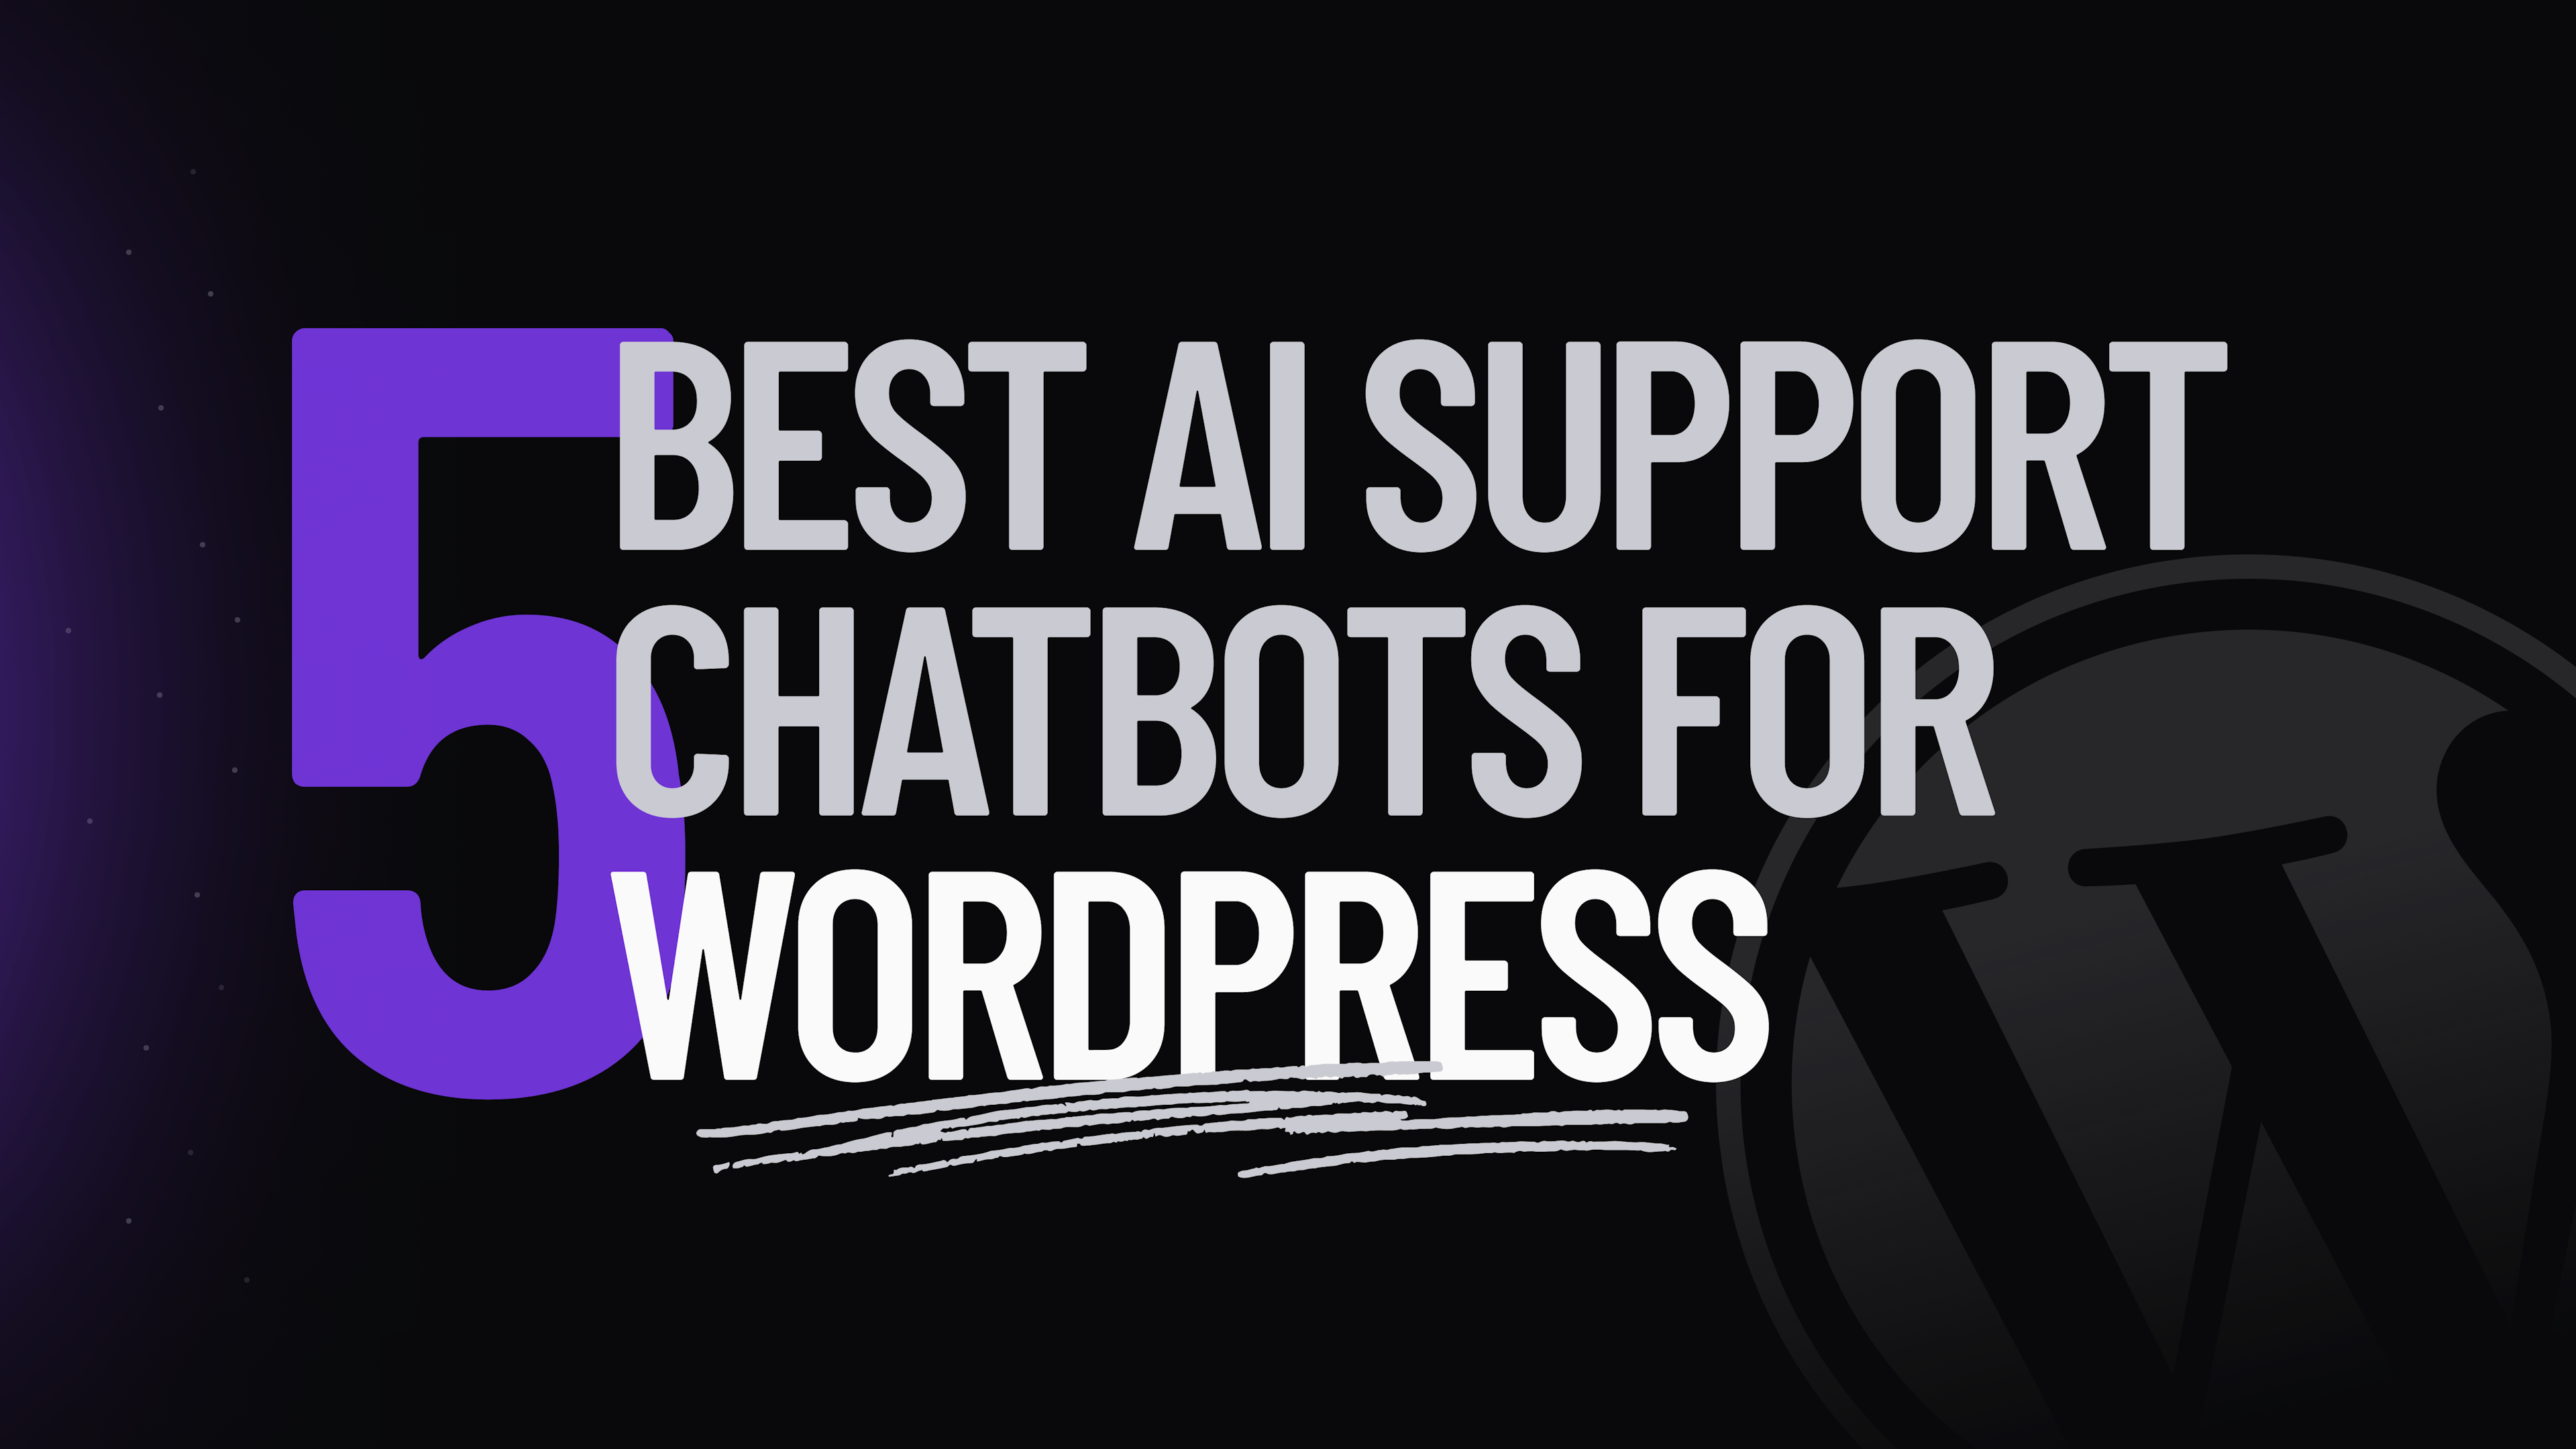 The 5 Best Easy-to-Use Chatbots for WordPress Websites